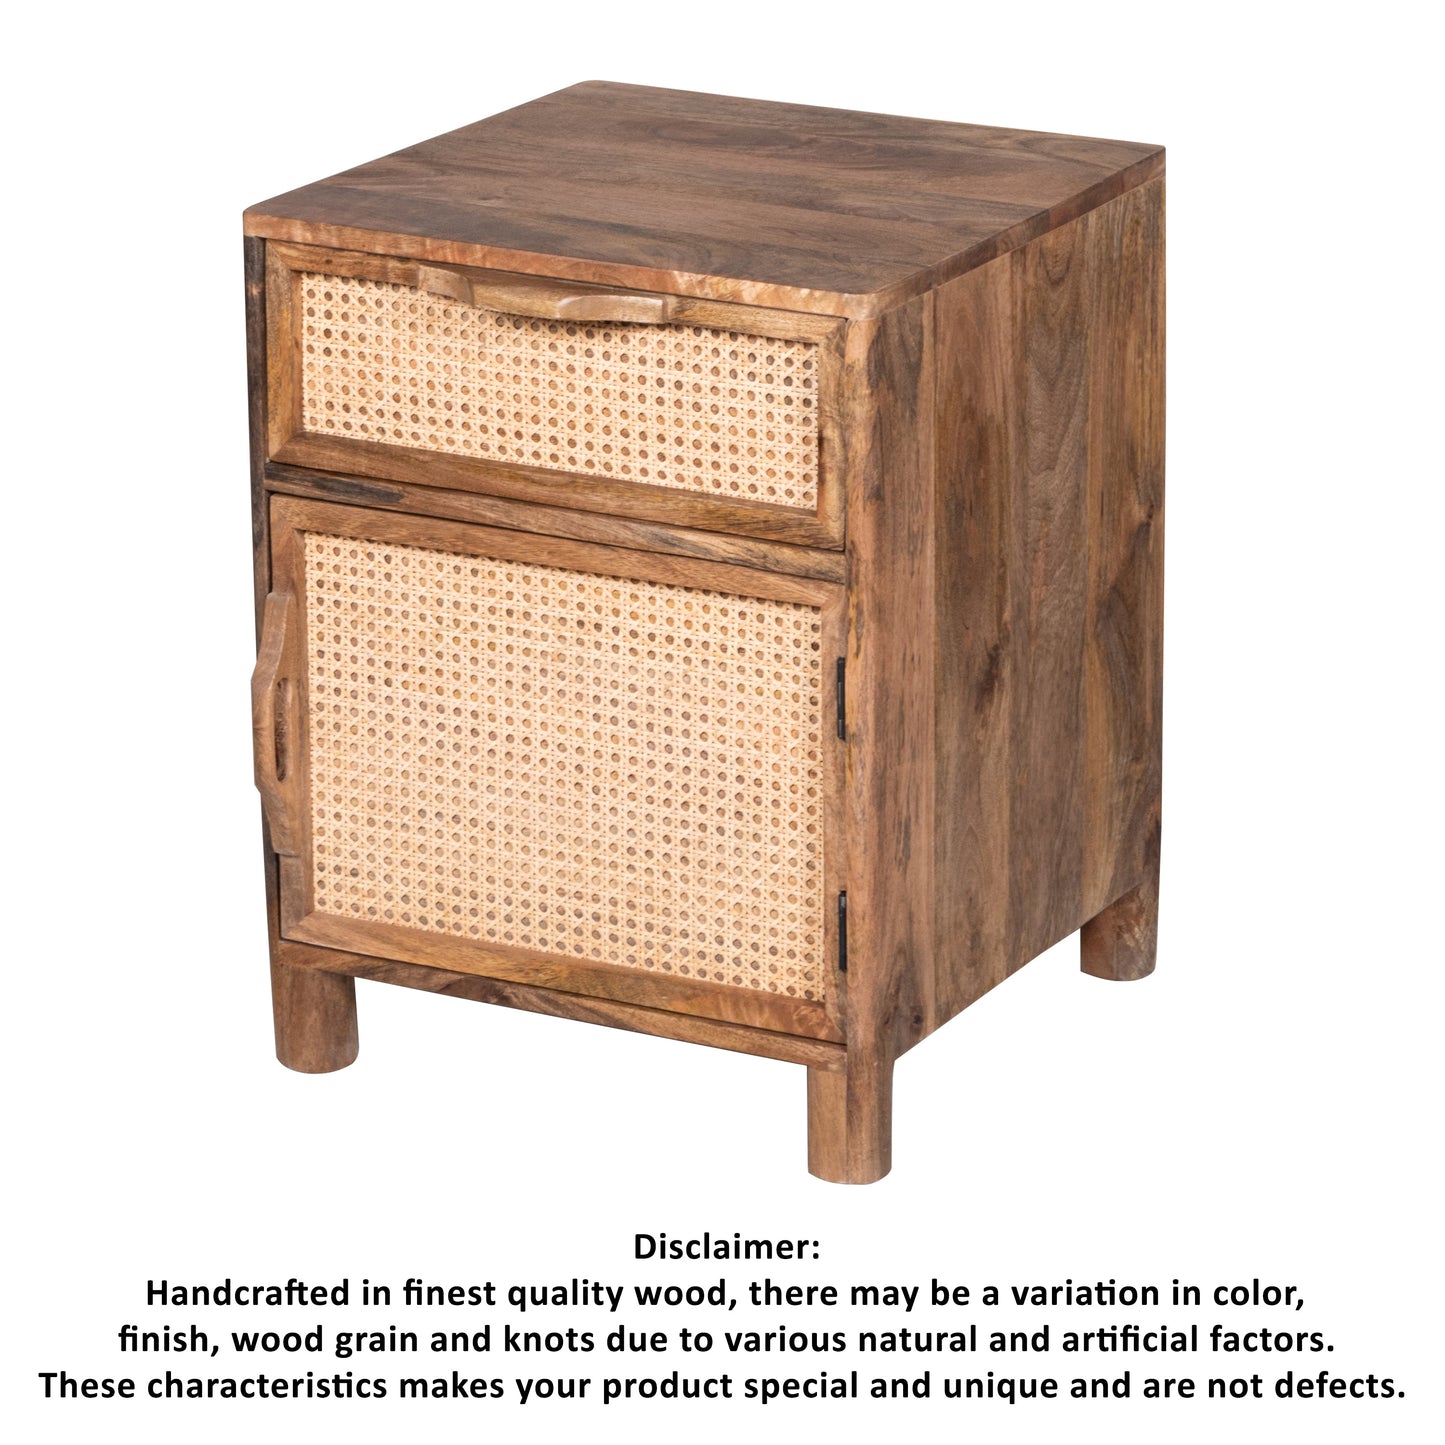 Mia 23 Inch Nightstand, Woven Rattan Cabinet Door and Drawer, Handcrafted Natural Brown Mango Wood The Urban Port